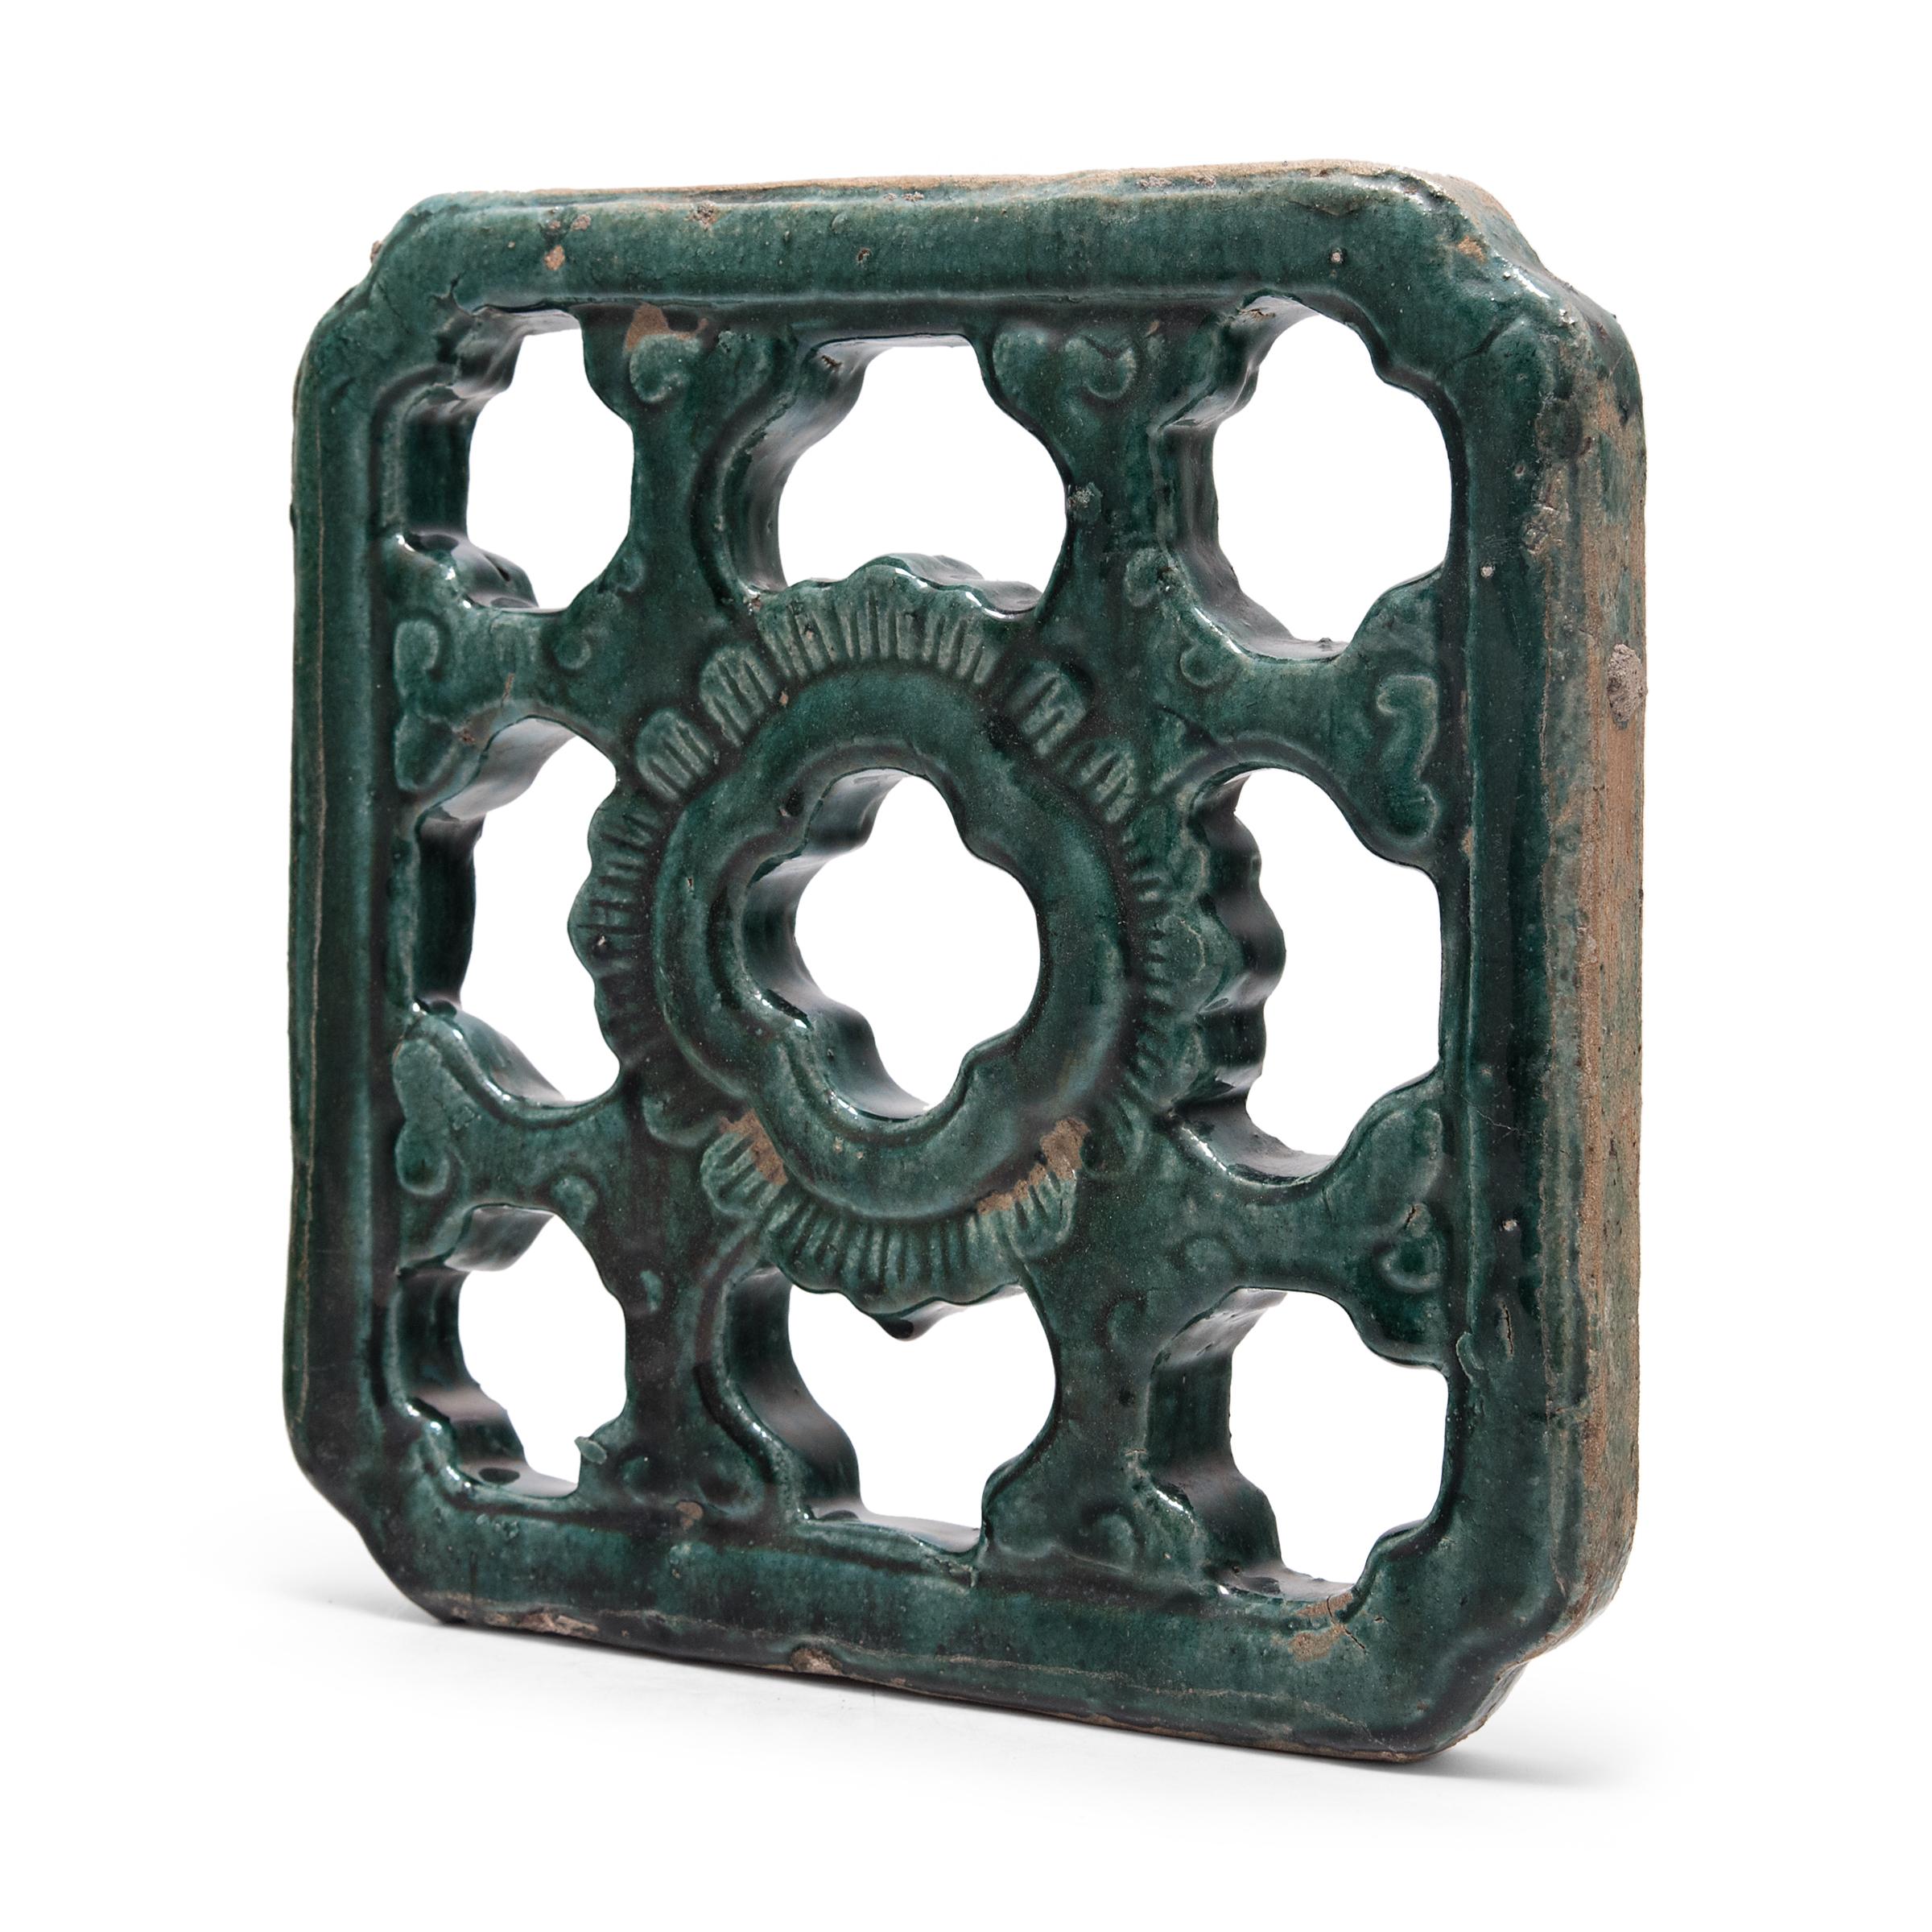 This early 20th century breezeway tile has a simple lattice design comprised of swirling clouds around a central floral motif. A beautiful turquoise-green glaze cloaks the exterior, pooling in every crevice with dark, richly saturated color. Much